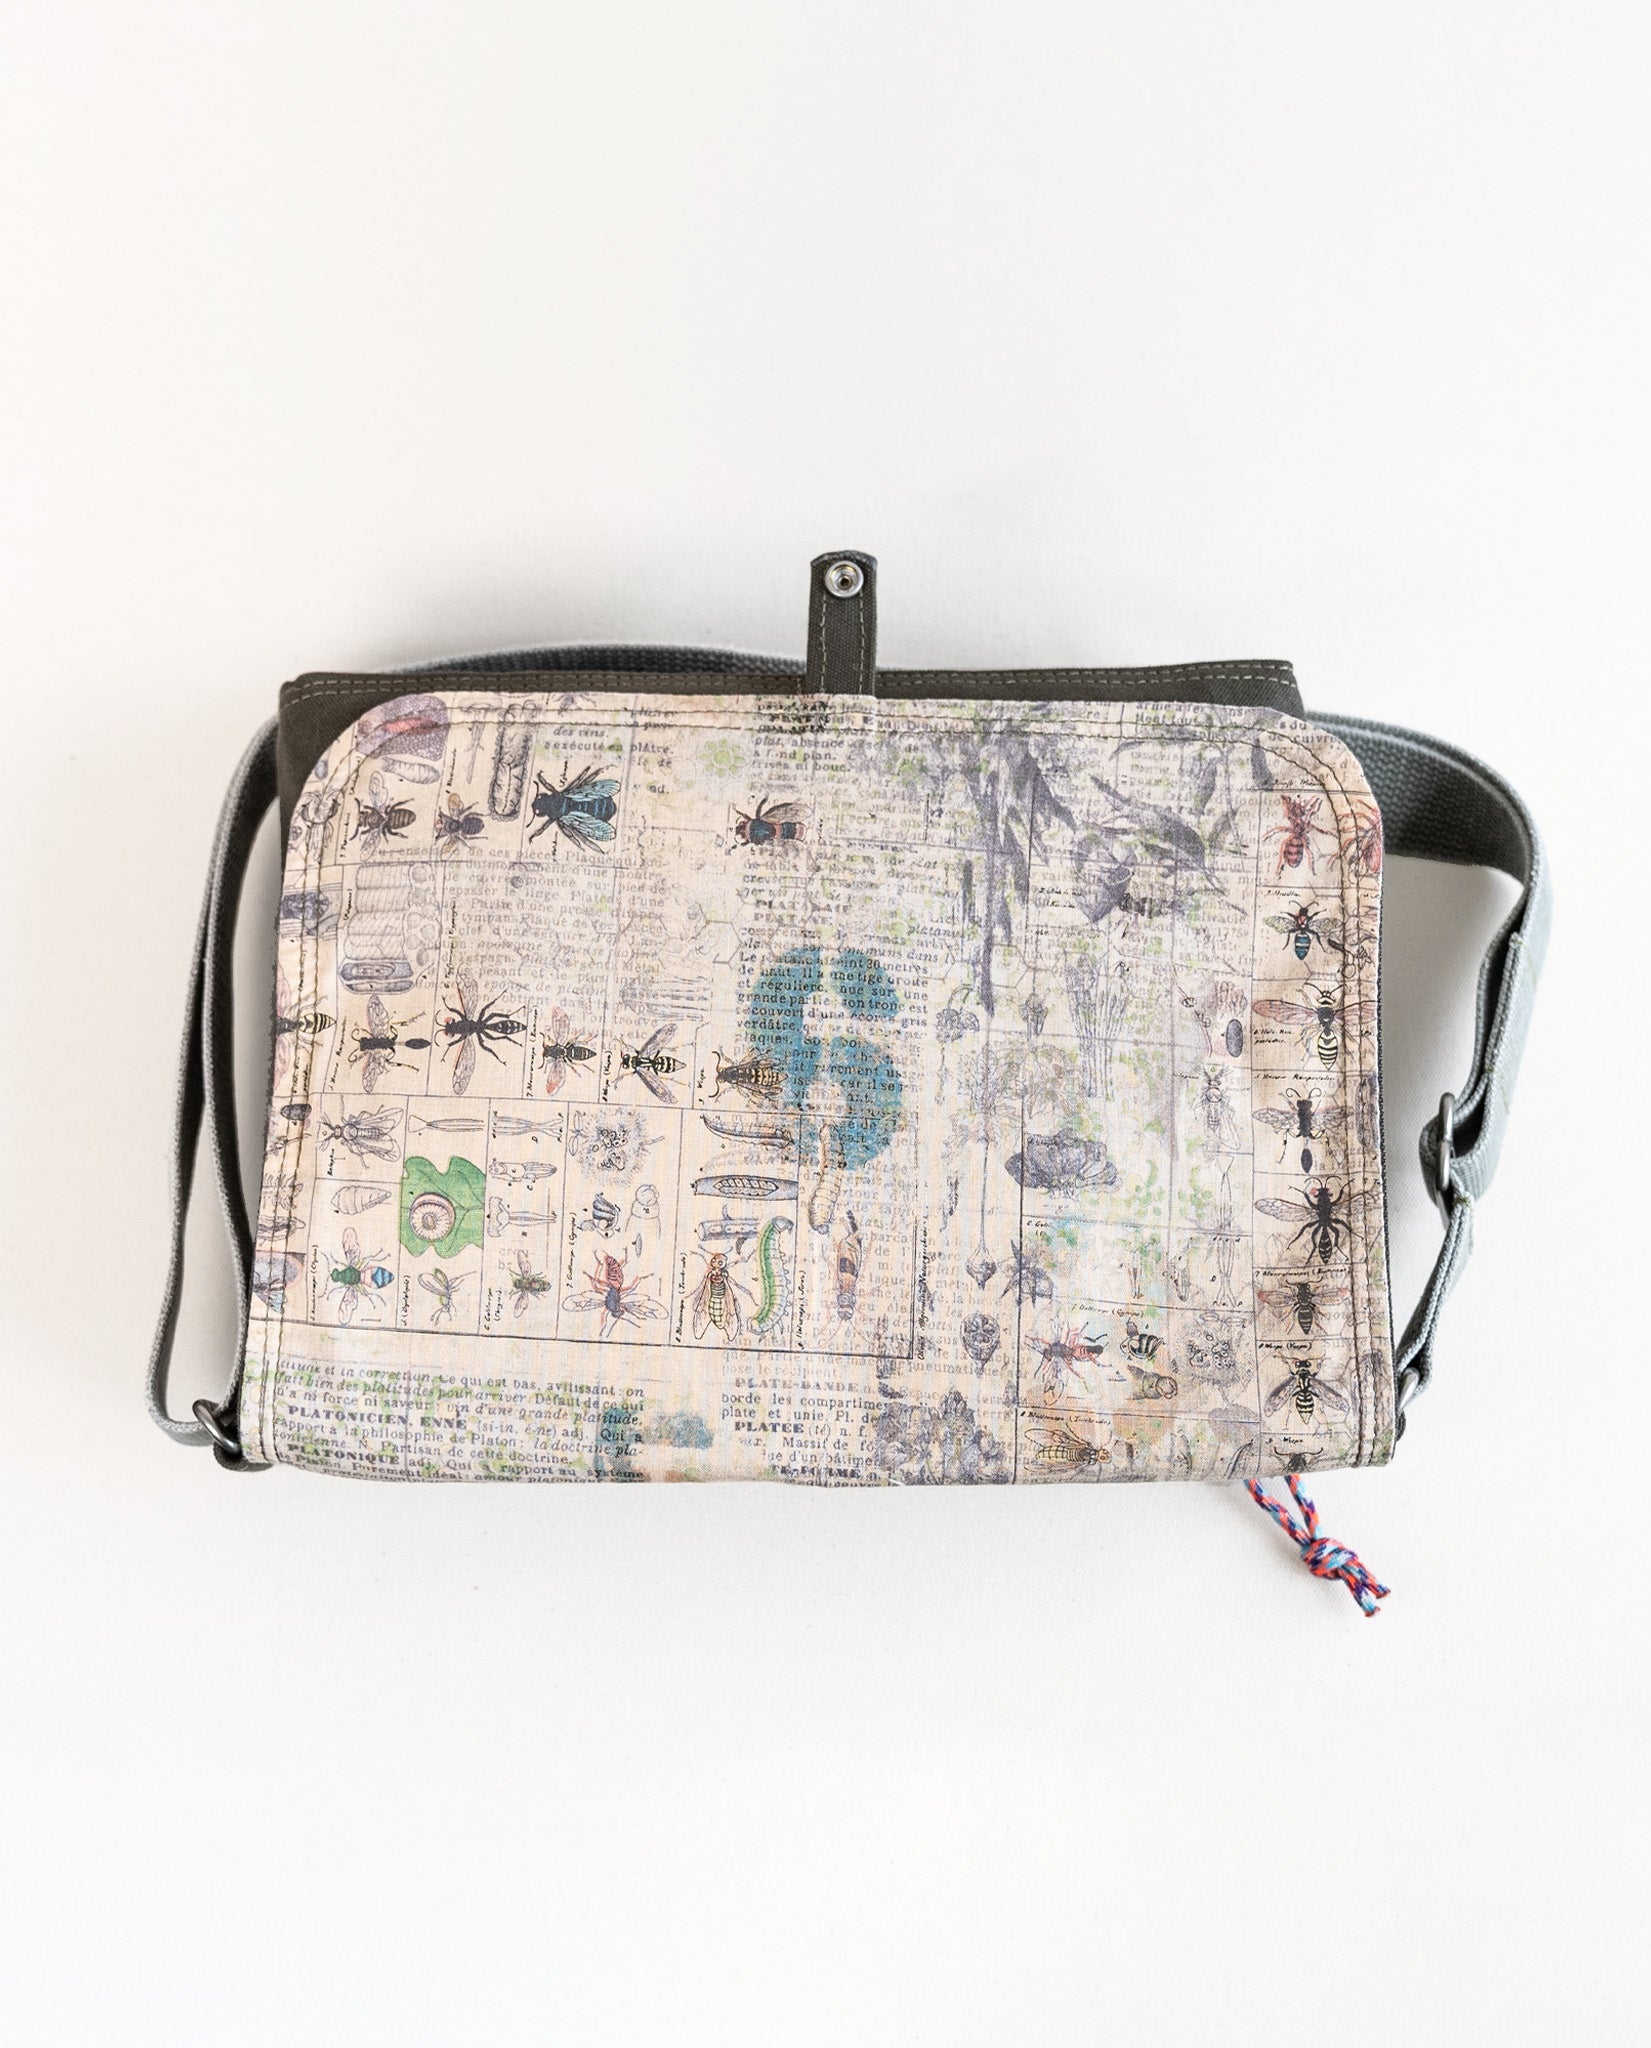 Inside of flap showing entomology print lining fabric of Dock 5’s Wild Cat Canvas Messenger Bag in olive featuring art from owner Natalija Walbridge